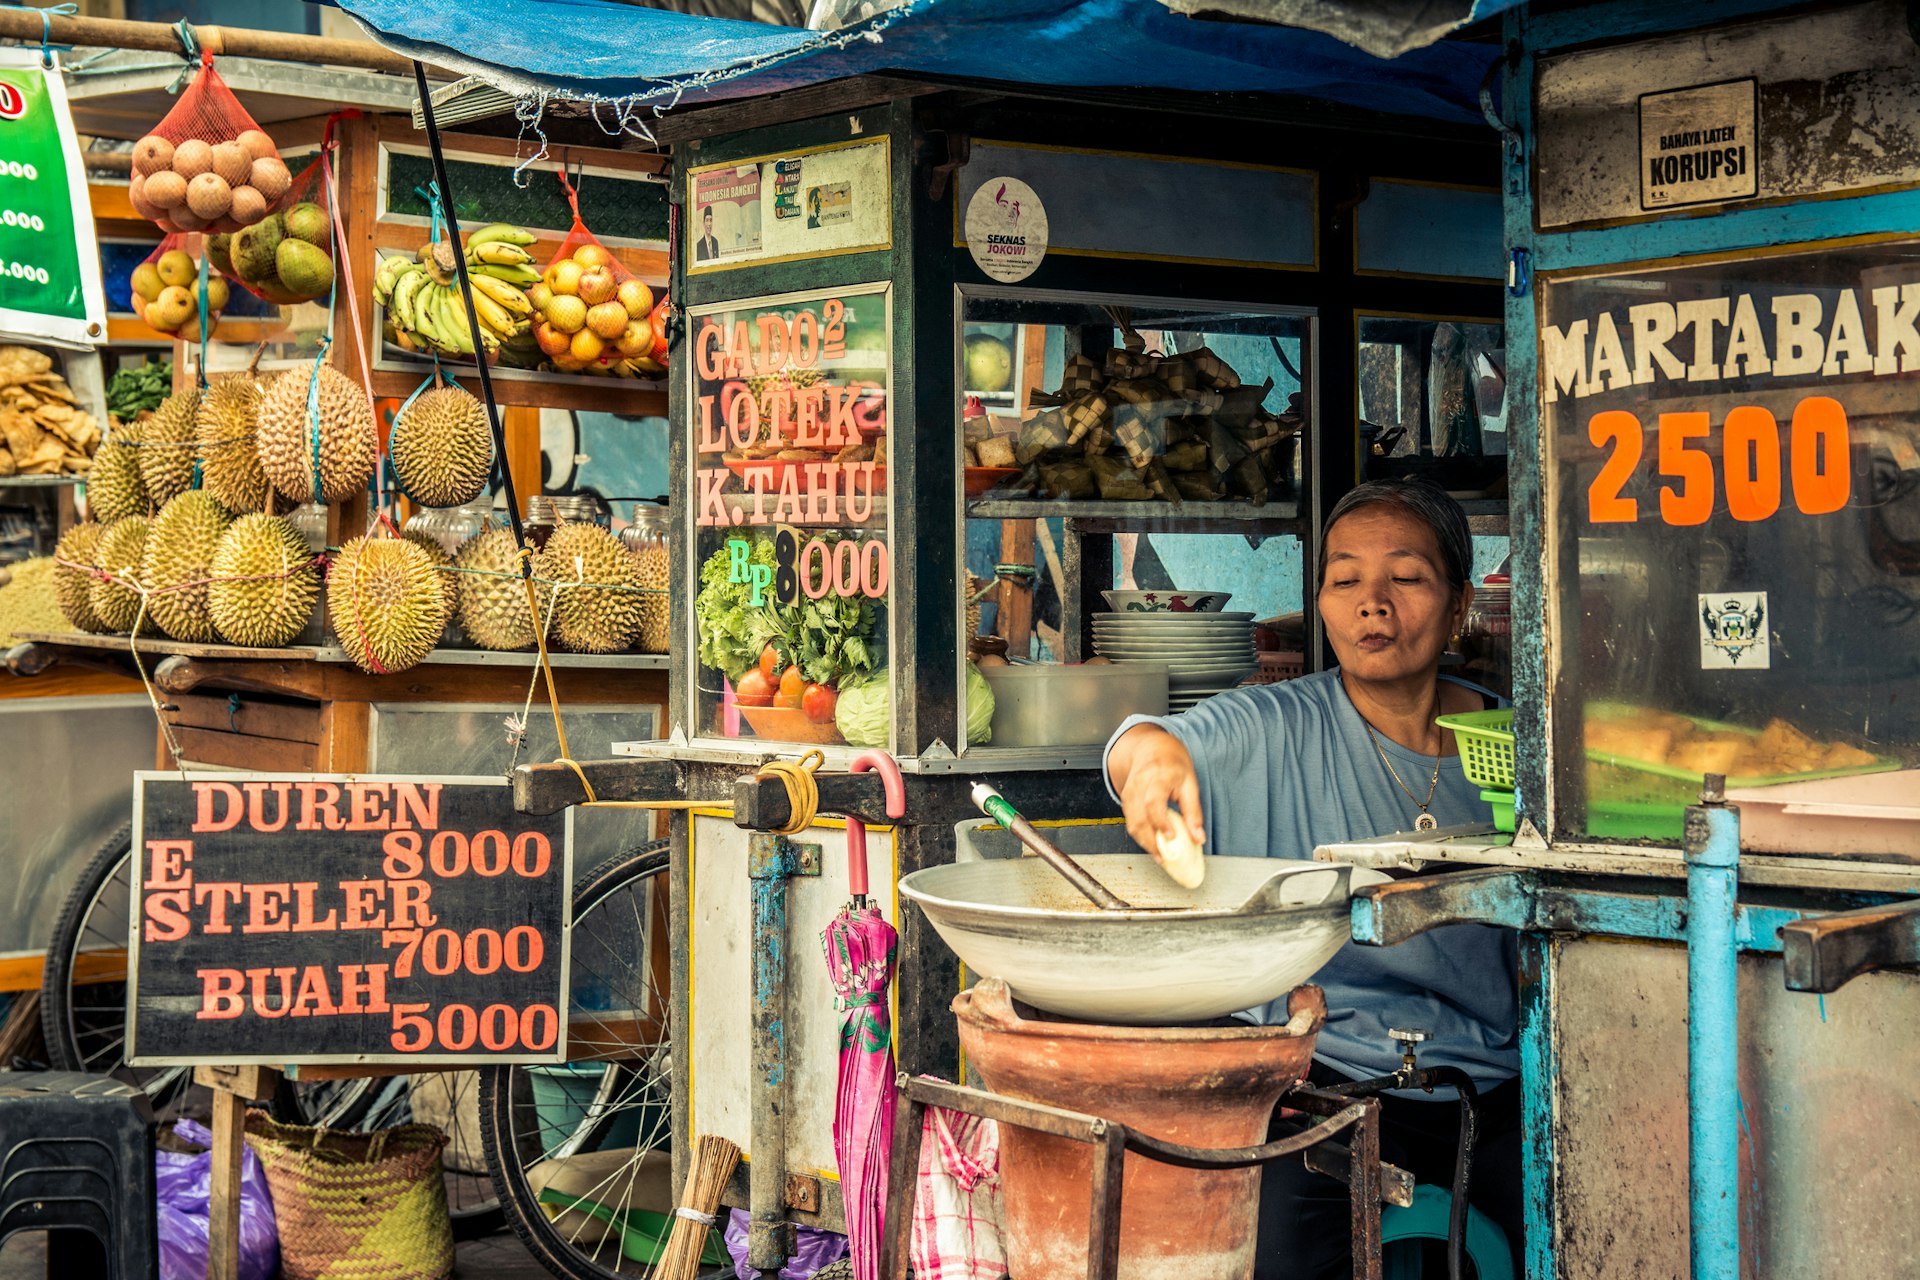 Local ambulant street vendor transporting her products on August 25, 2015 in Bali, Indonesia. Local vendors make an honest living selling snacks